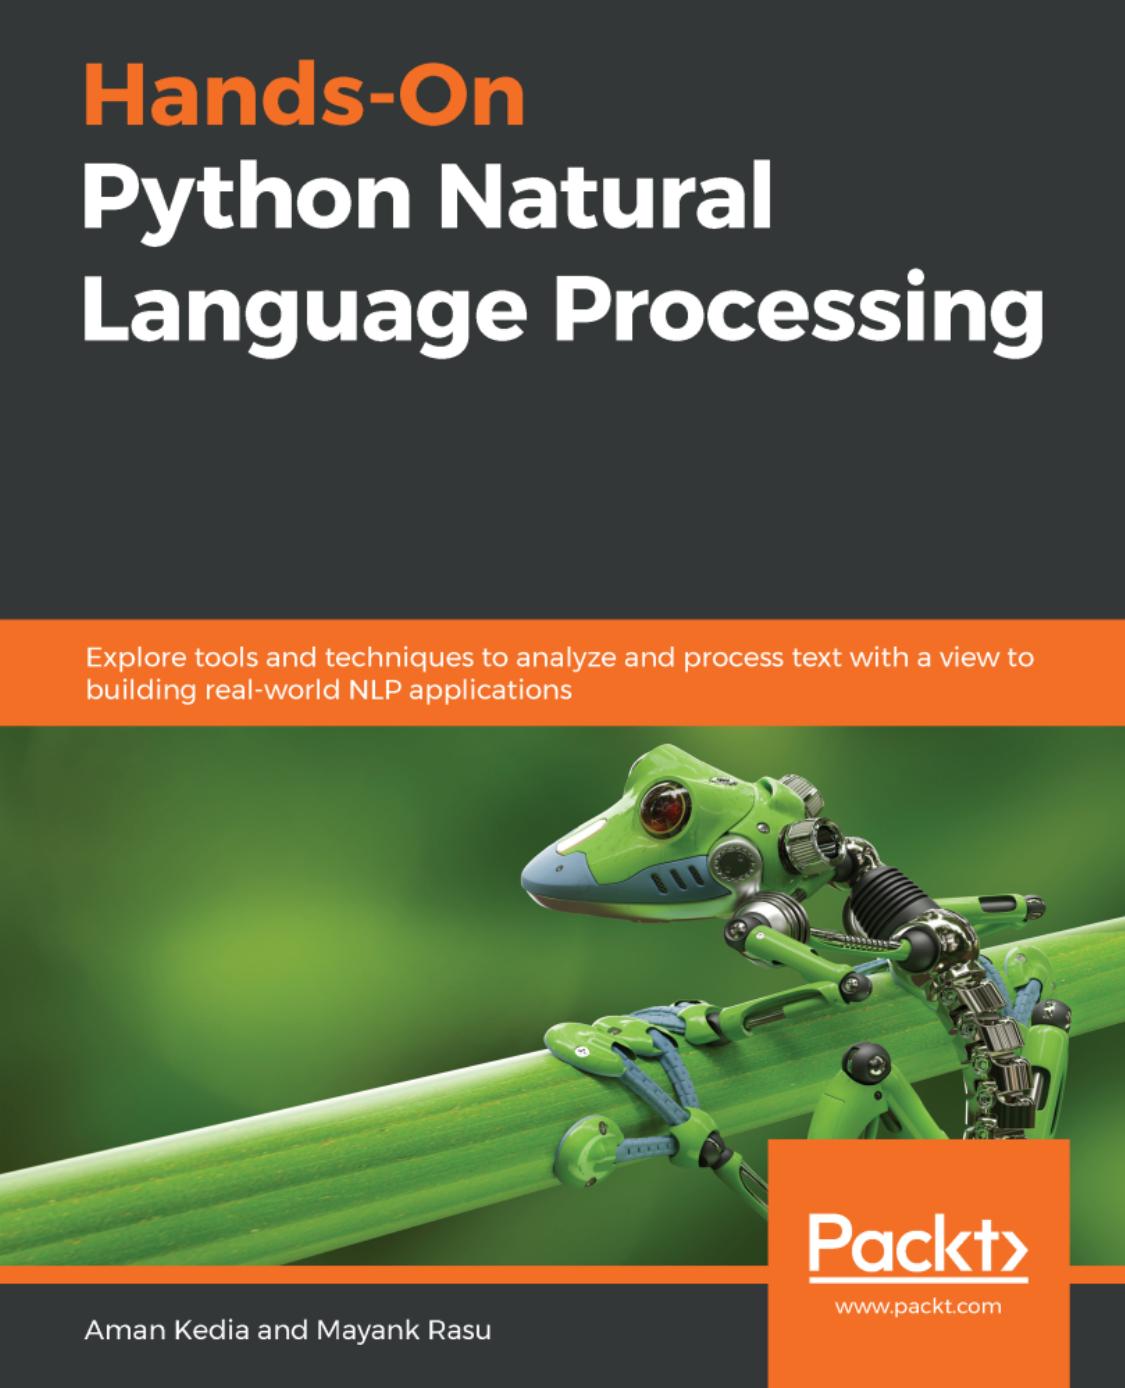 Hands-On Python Natural Language Processing: Explore Tools and Techniques to Analyze and Process Text with a View to Building Real-World NLP Applications